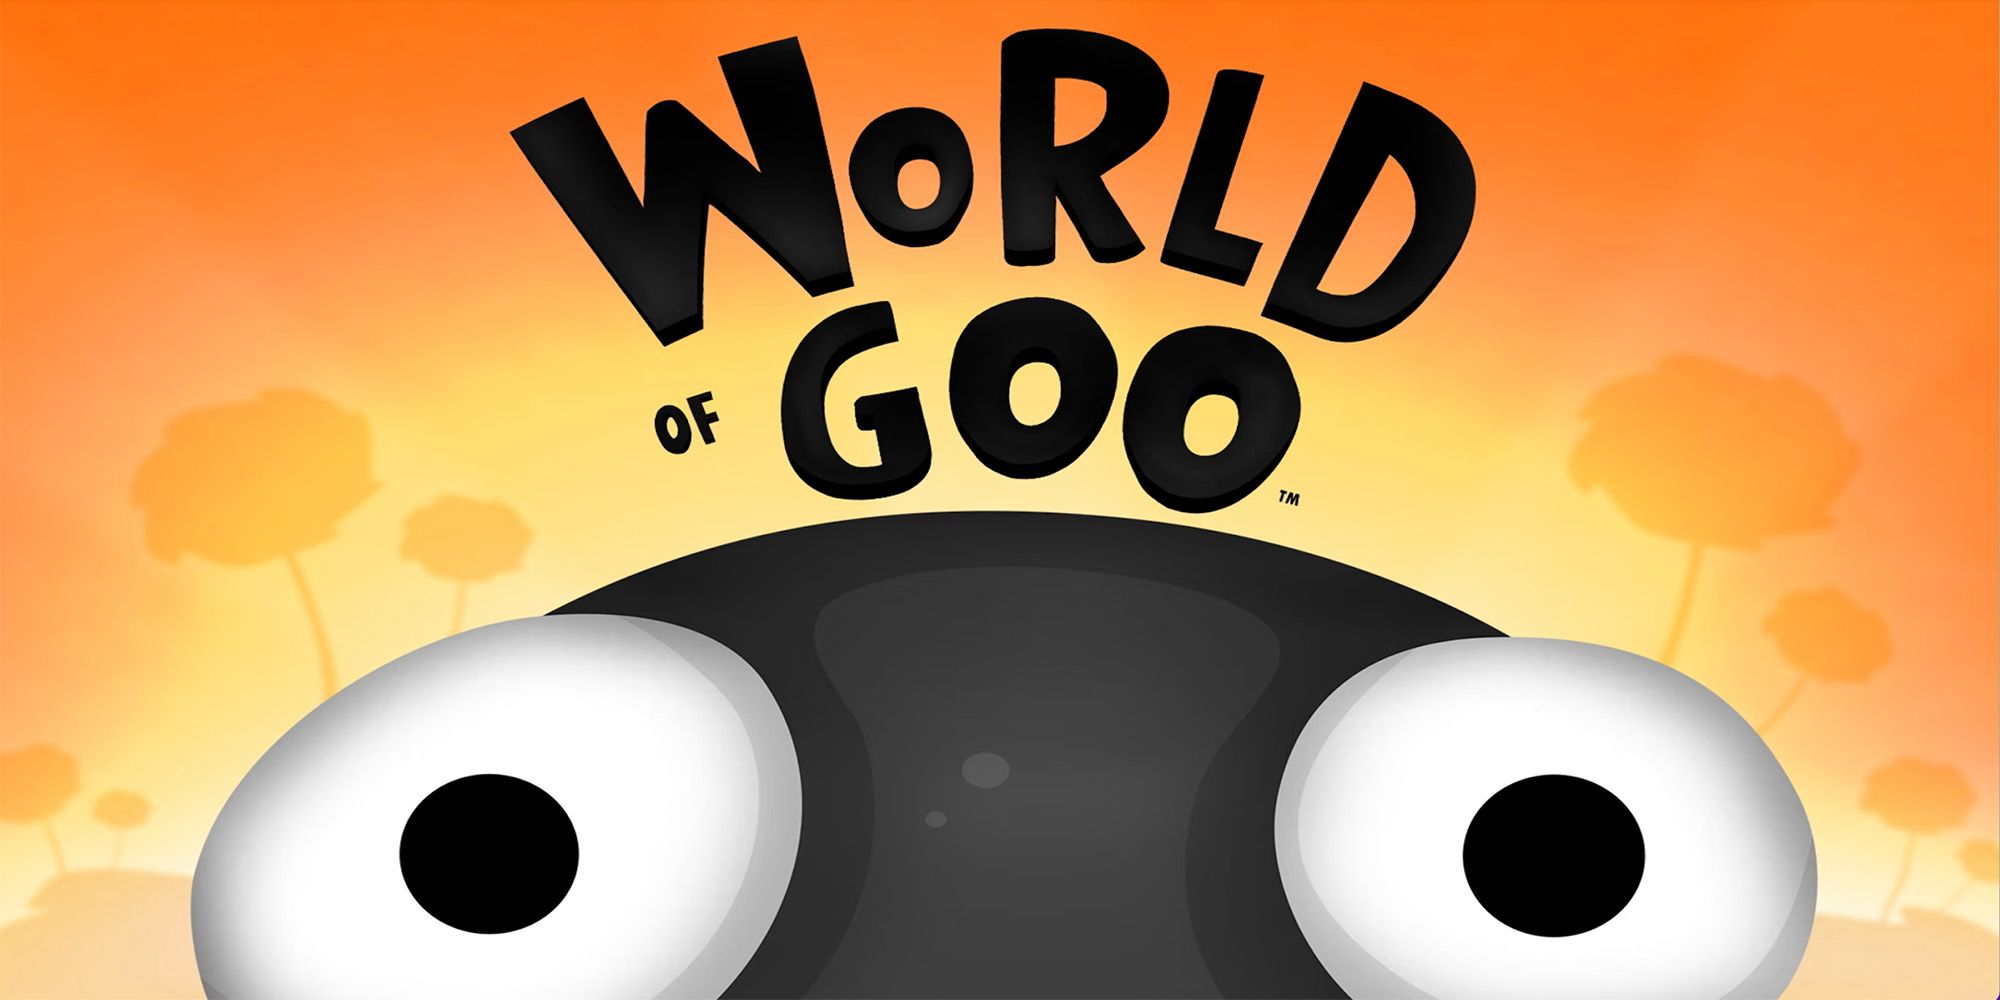 World Of Goo - A Blob Of Goo With Two Big Eyes